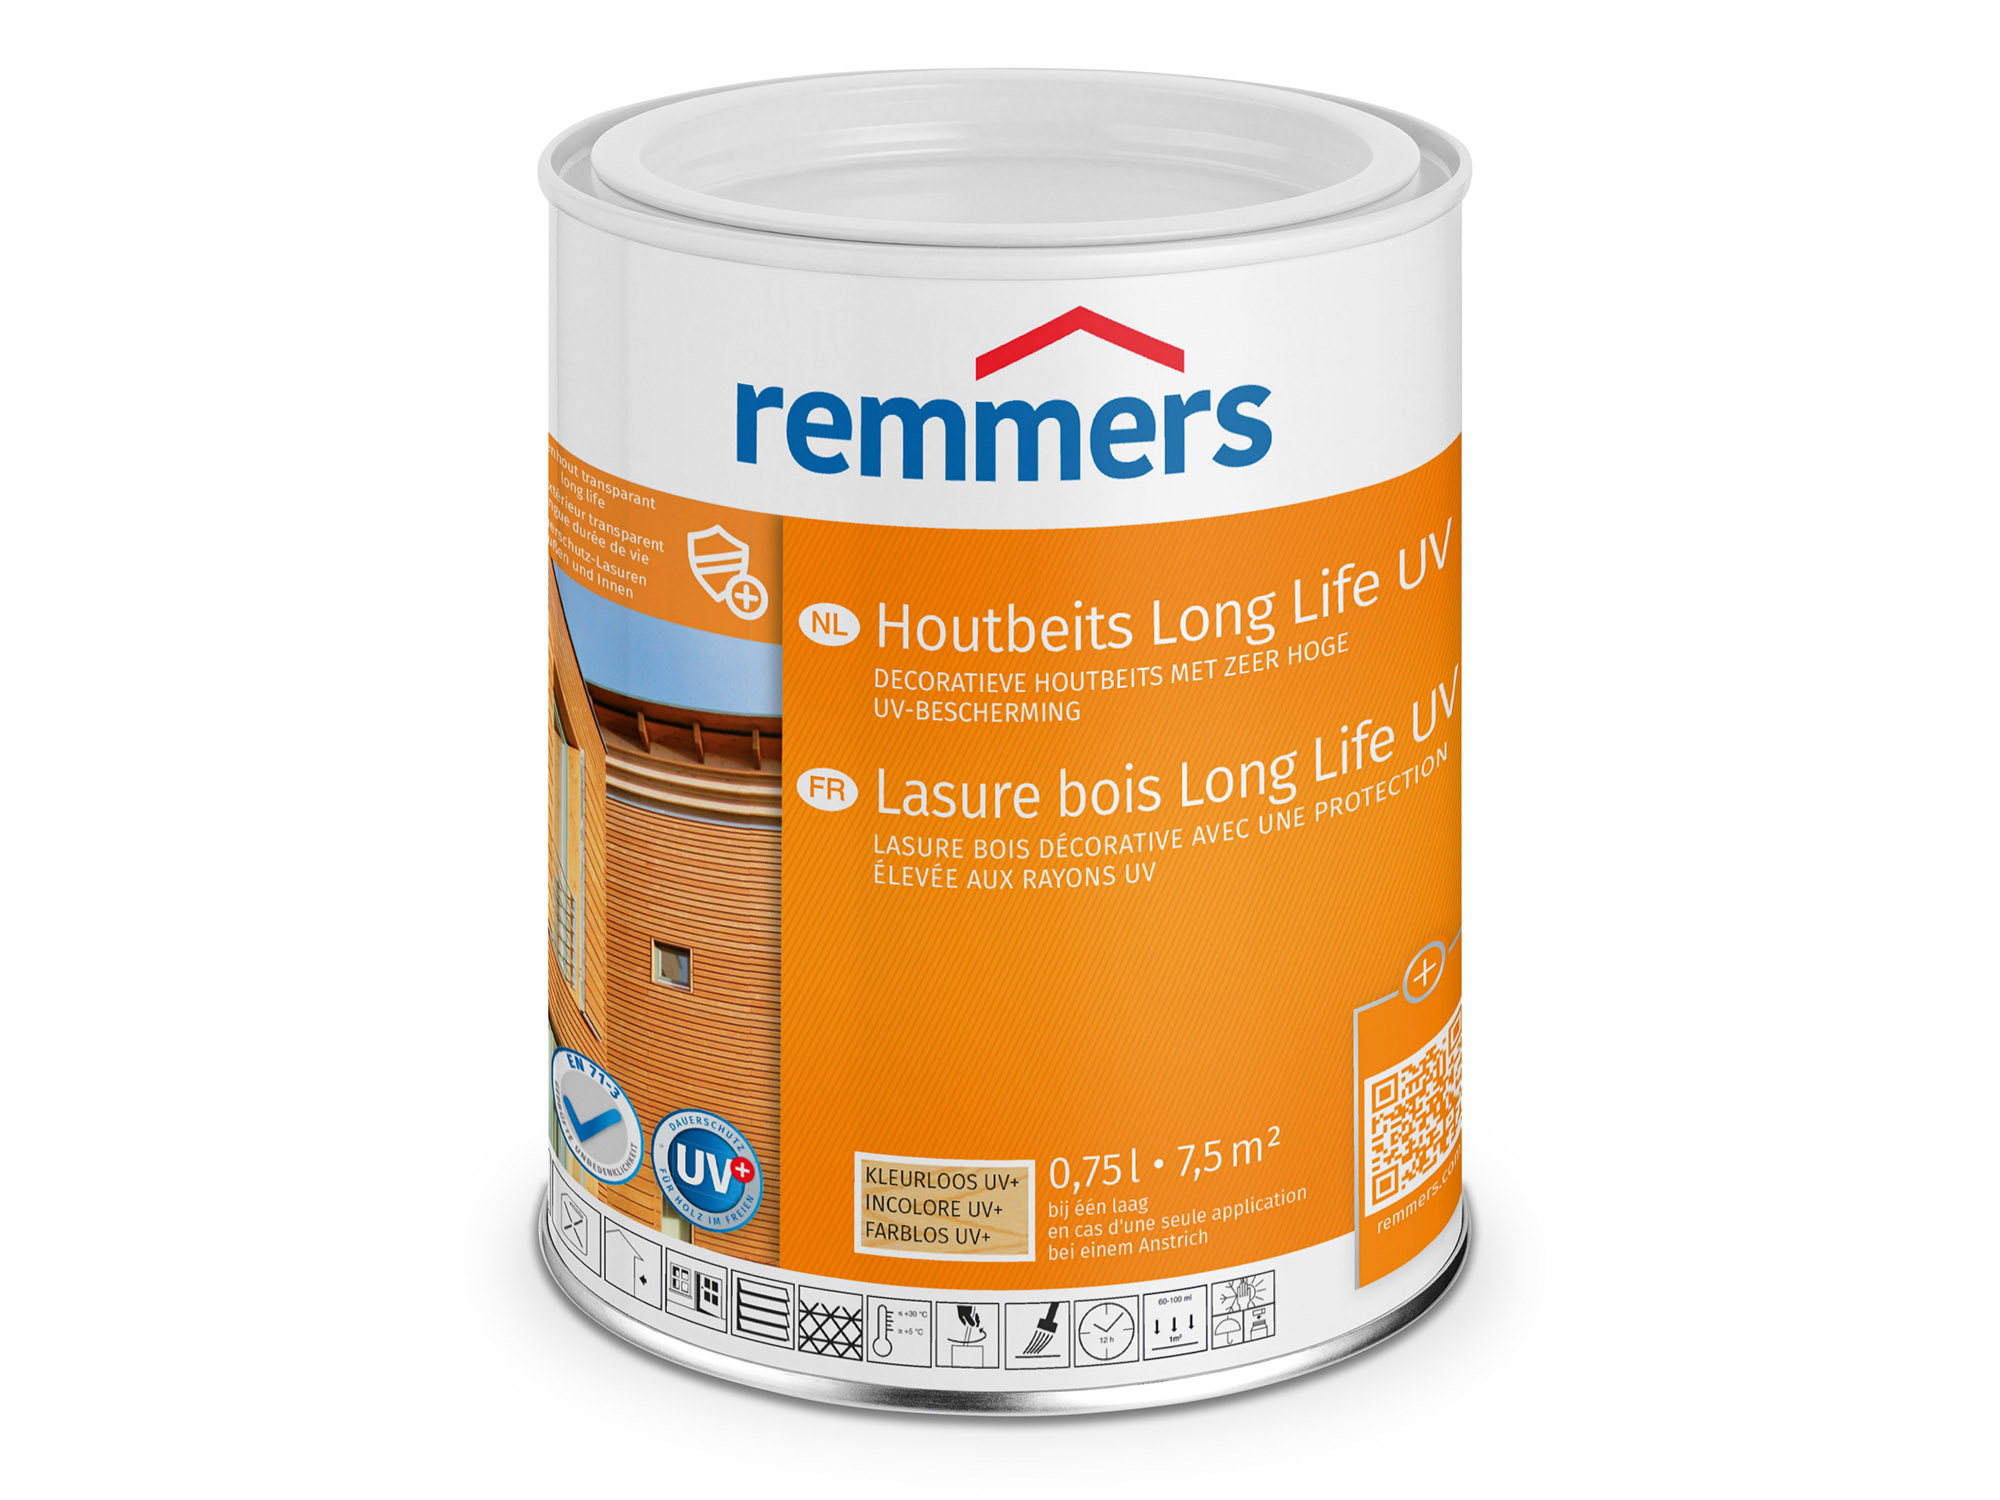 Remmers Houtbeits Long Life UV